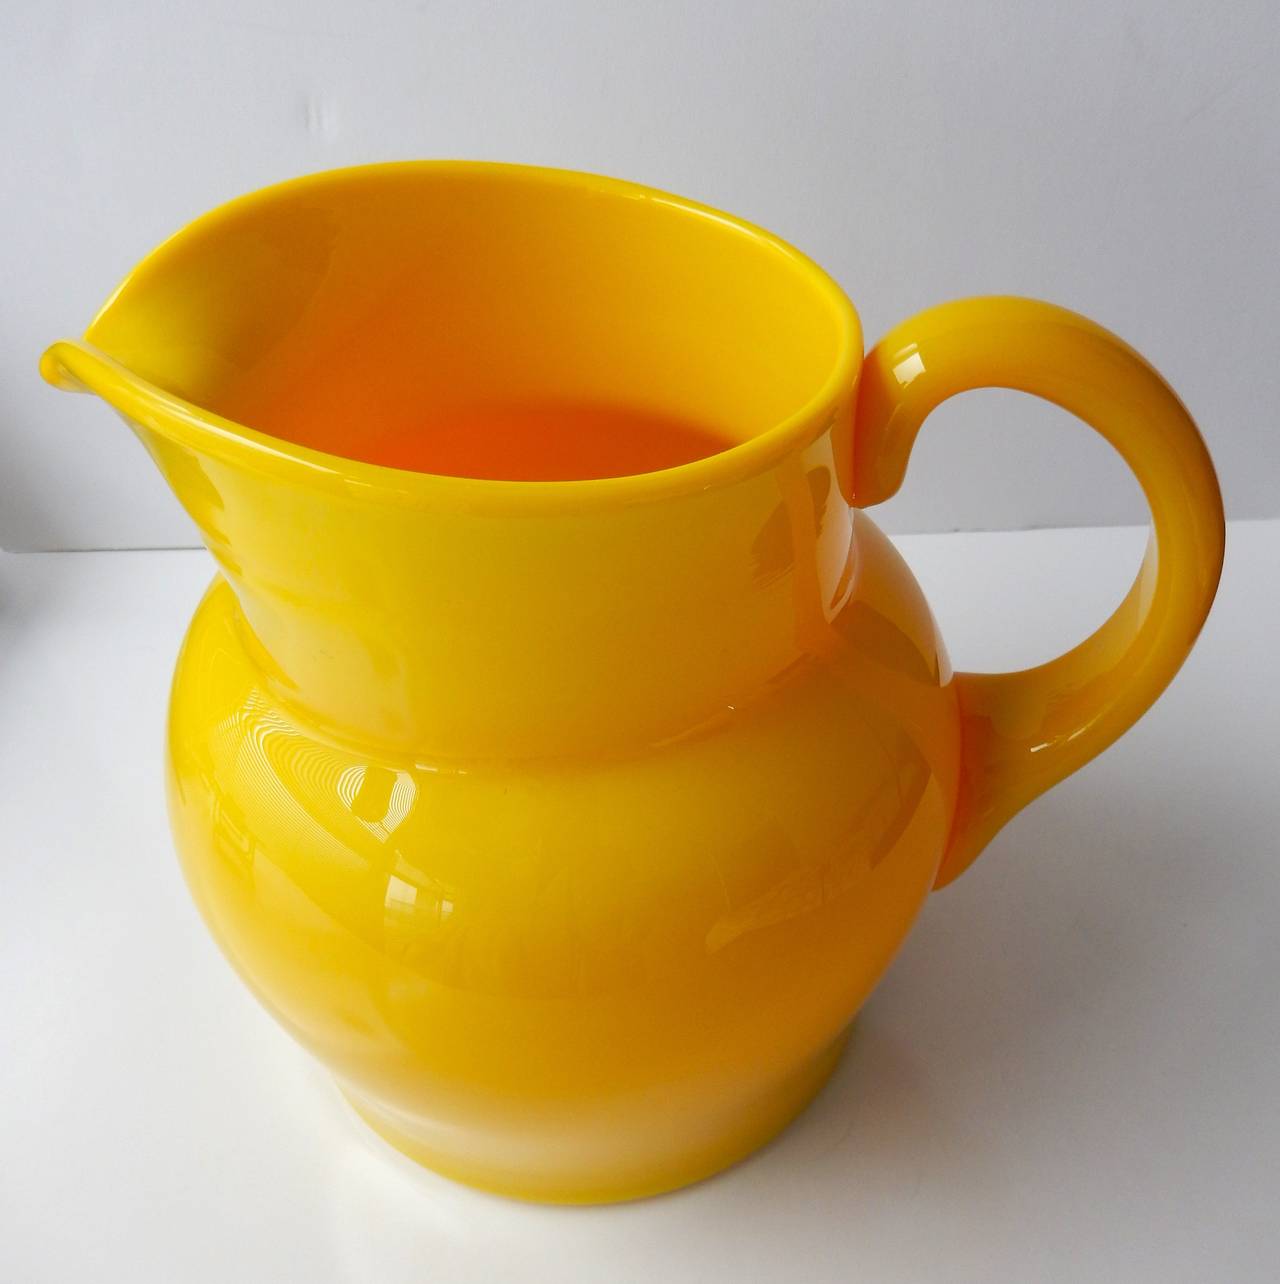 A handblown, saffron yellow glass pitcher by the Swedish artist
Erik Hoglund (1932-1998). His work is included in many museums throughout the world including: Nationalmuseum, Stockholm; Corning Glass Museum, New York; Victoria and Albert Museum,